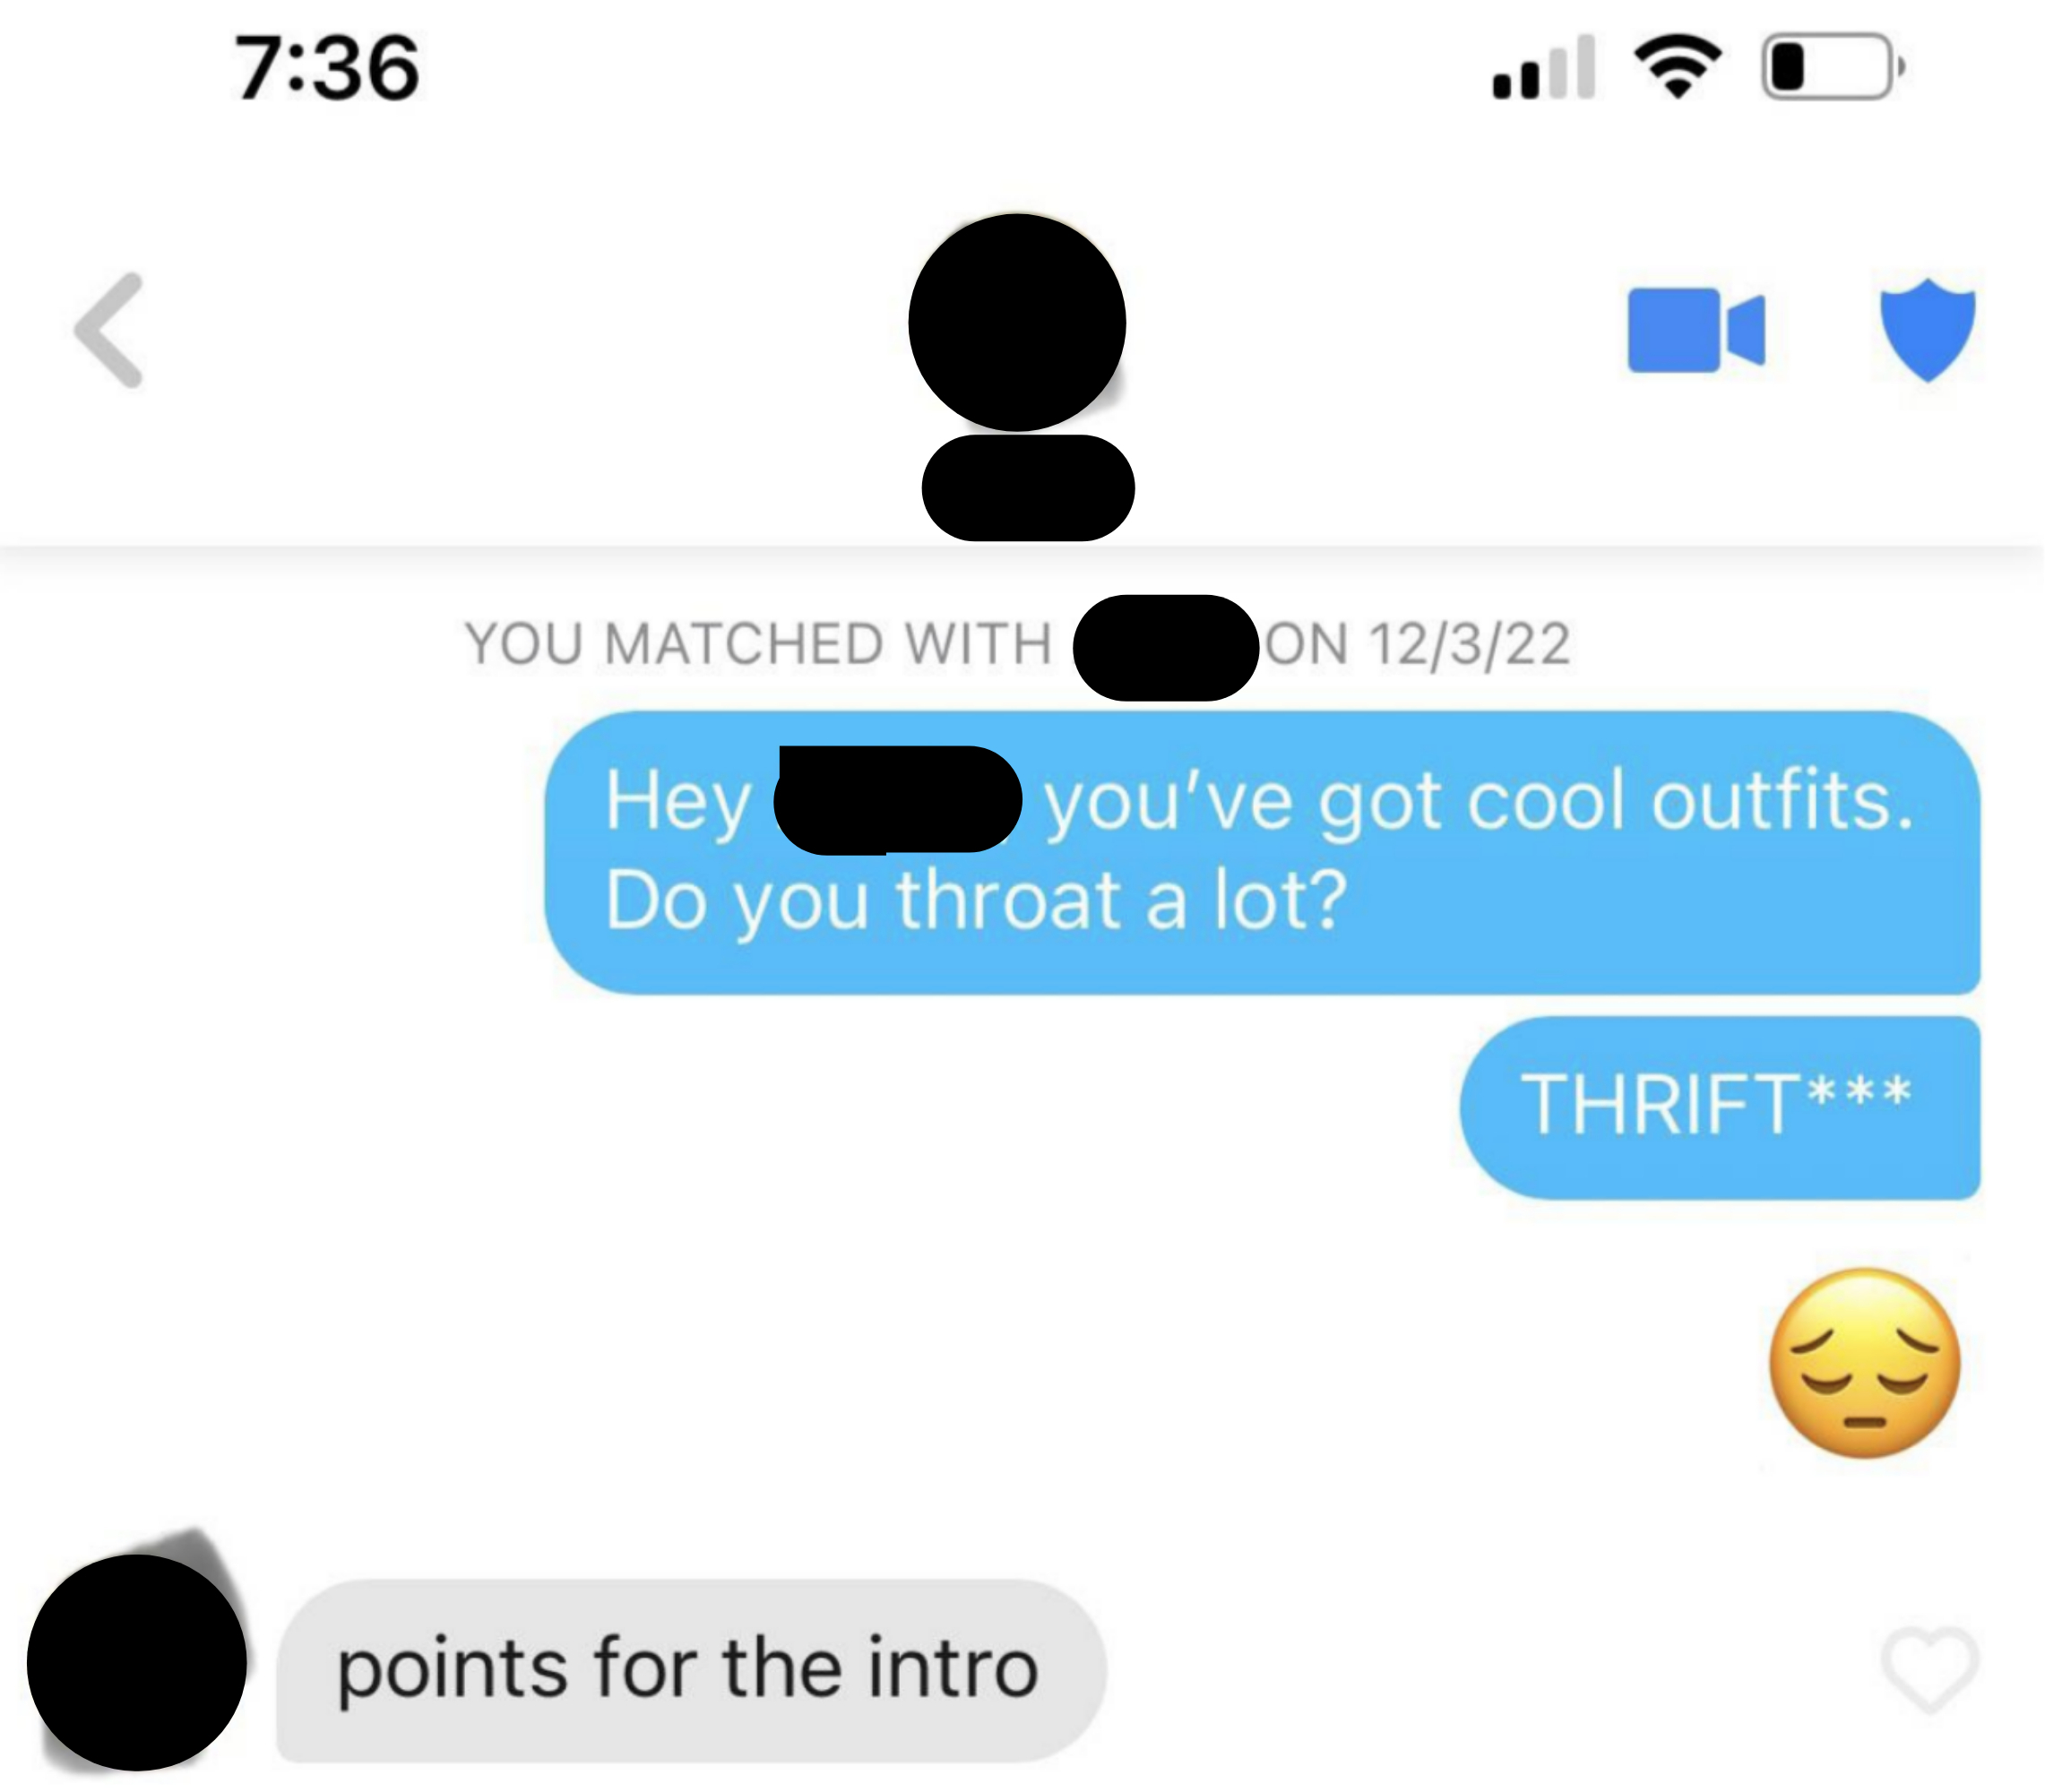 A dating app conversation starts with &quot;you&#x27;ve got cool outfits, do you throat a lot&quot; and a second text changing throat to thrift with a sad emoji